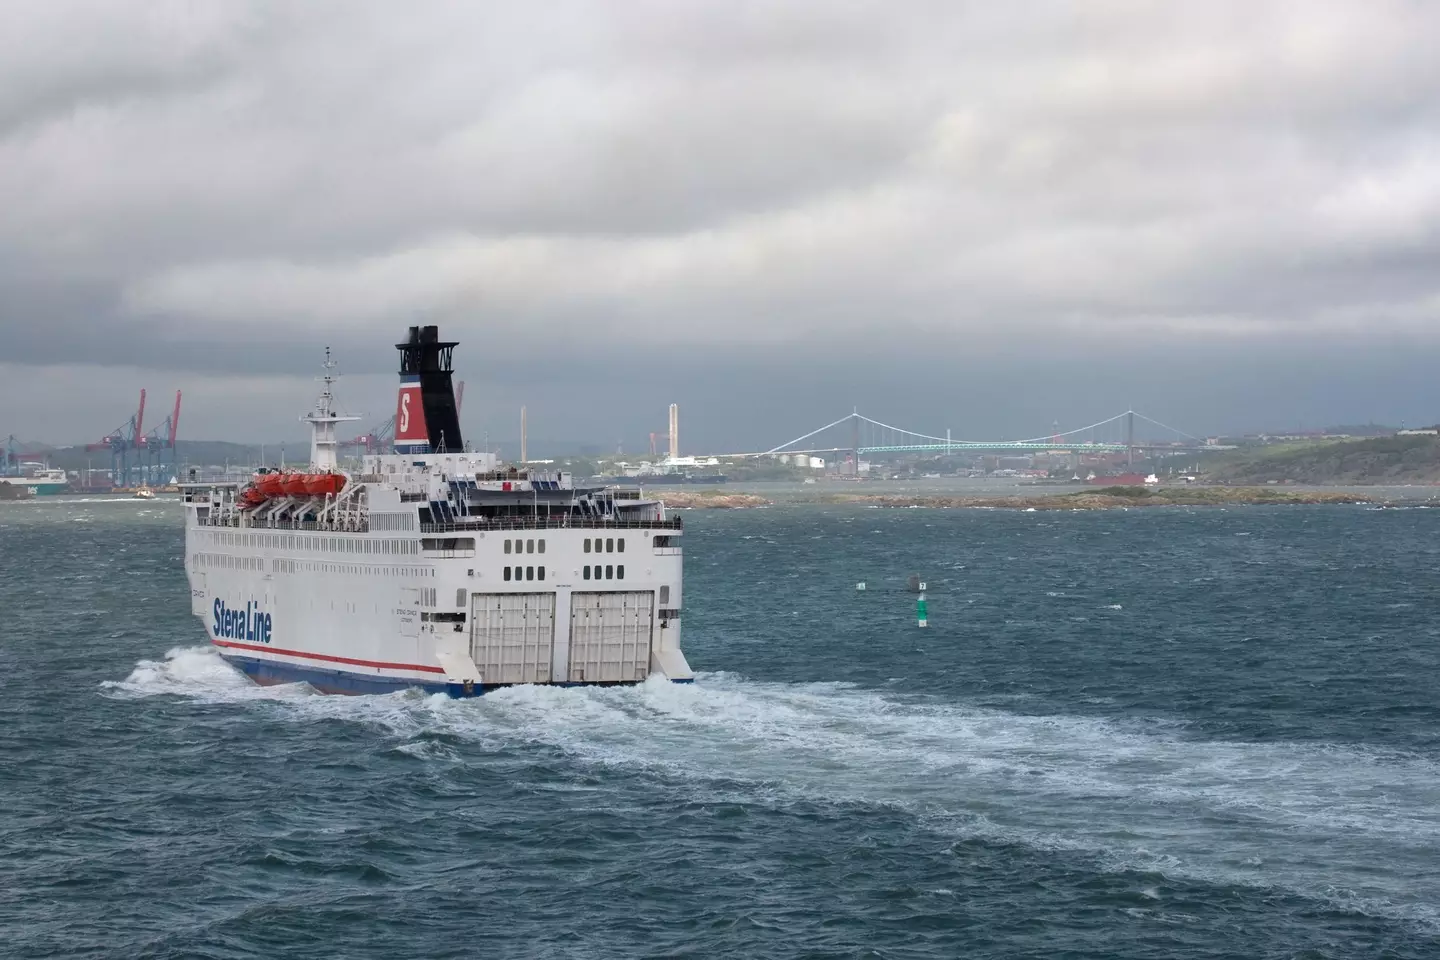 A person fell overboard the Stena Superfast 8 as it approached port in Loch Ryan.